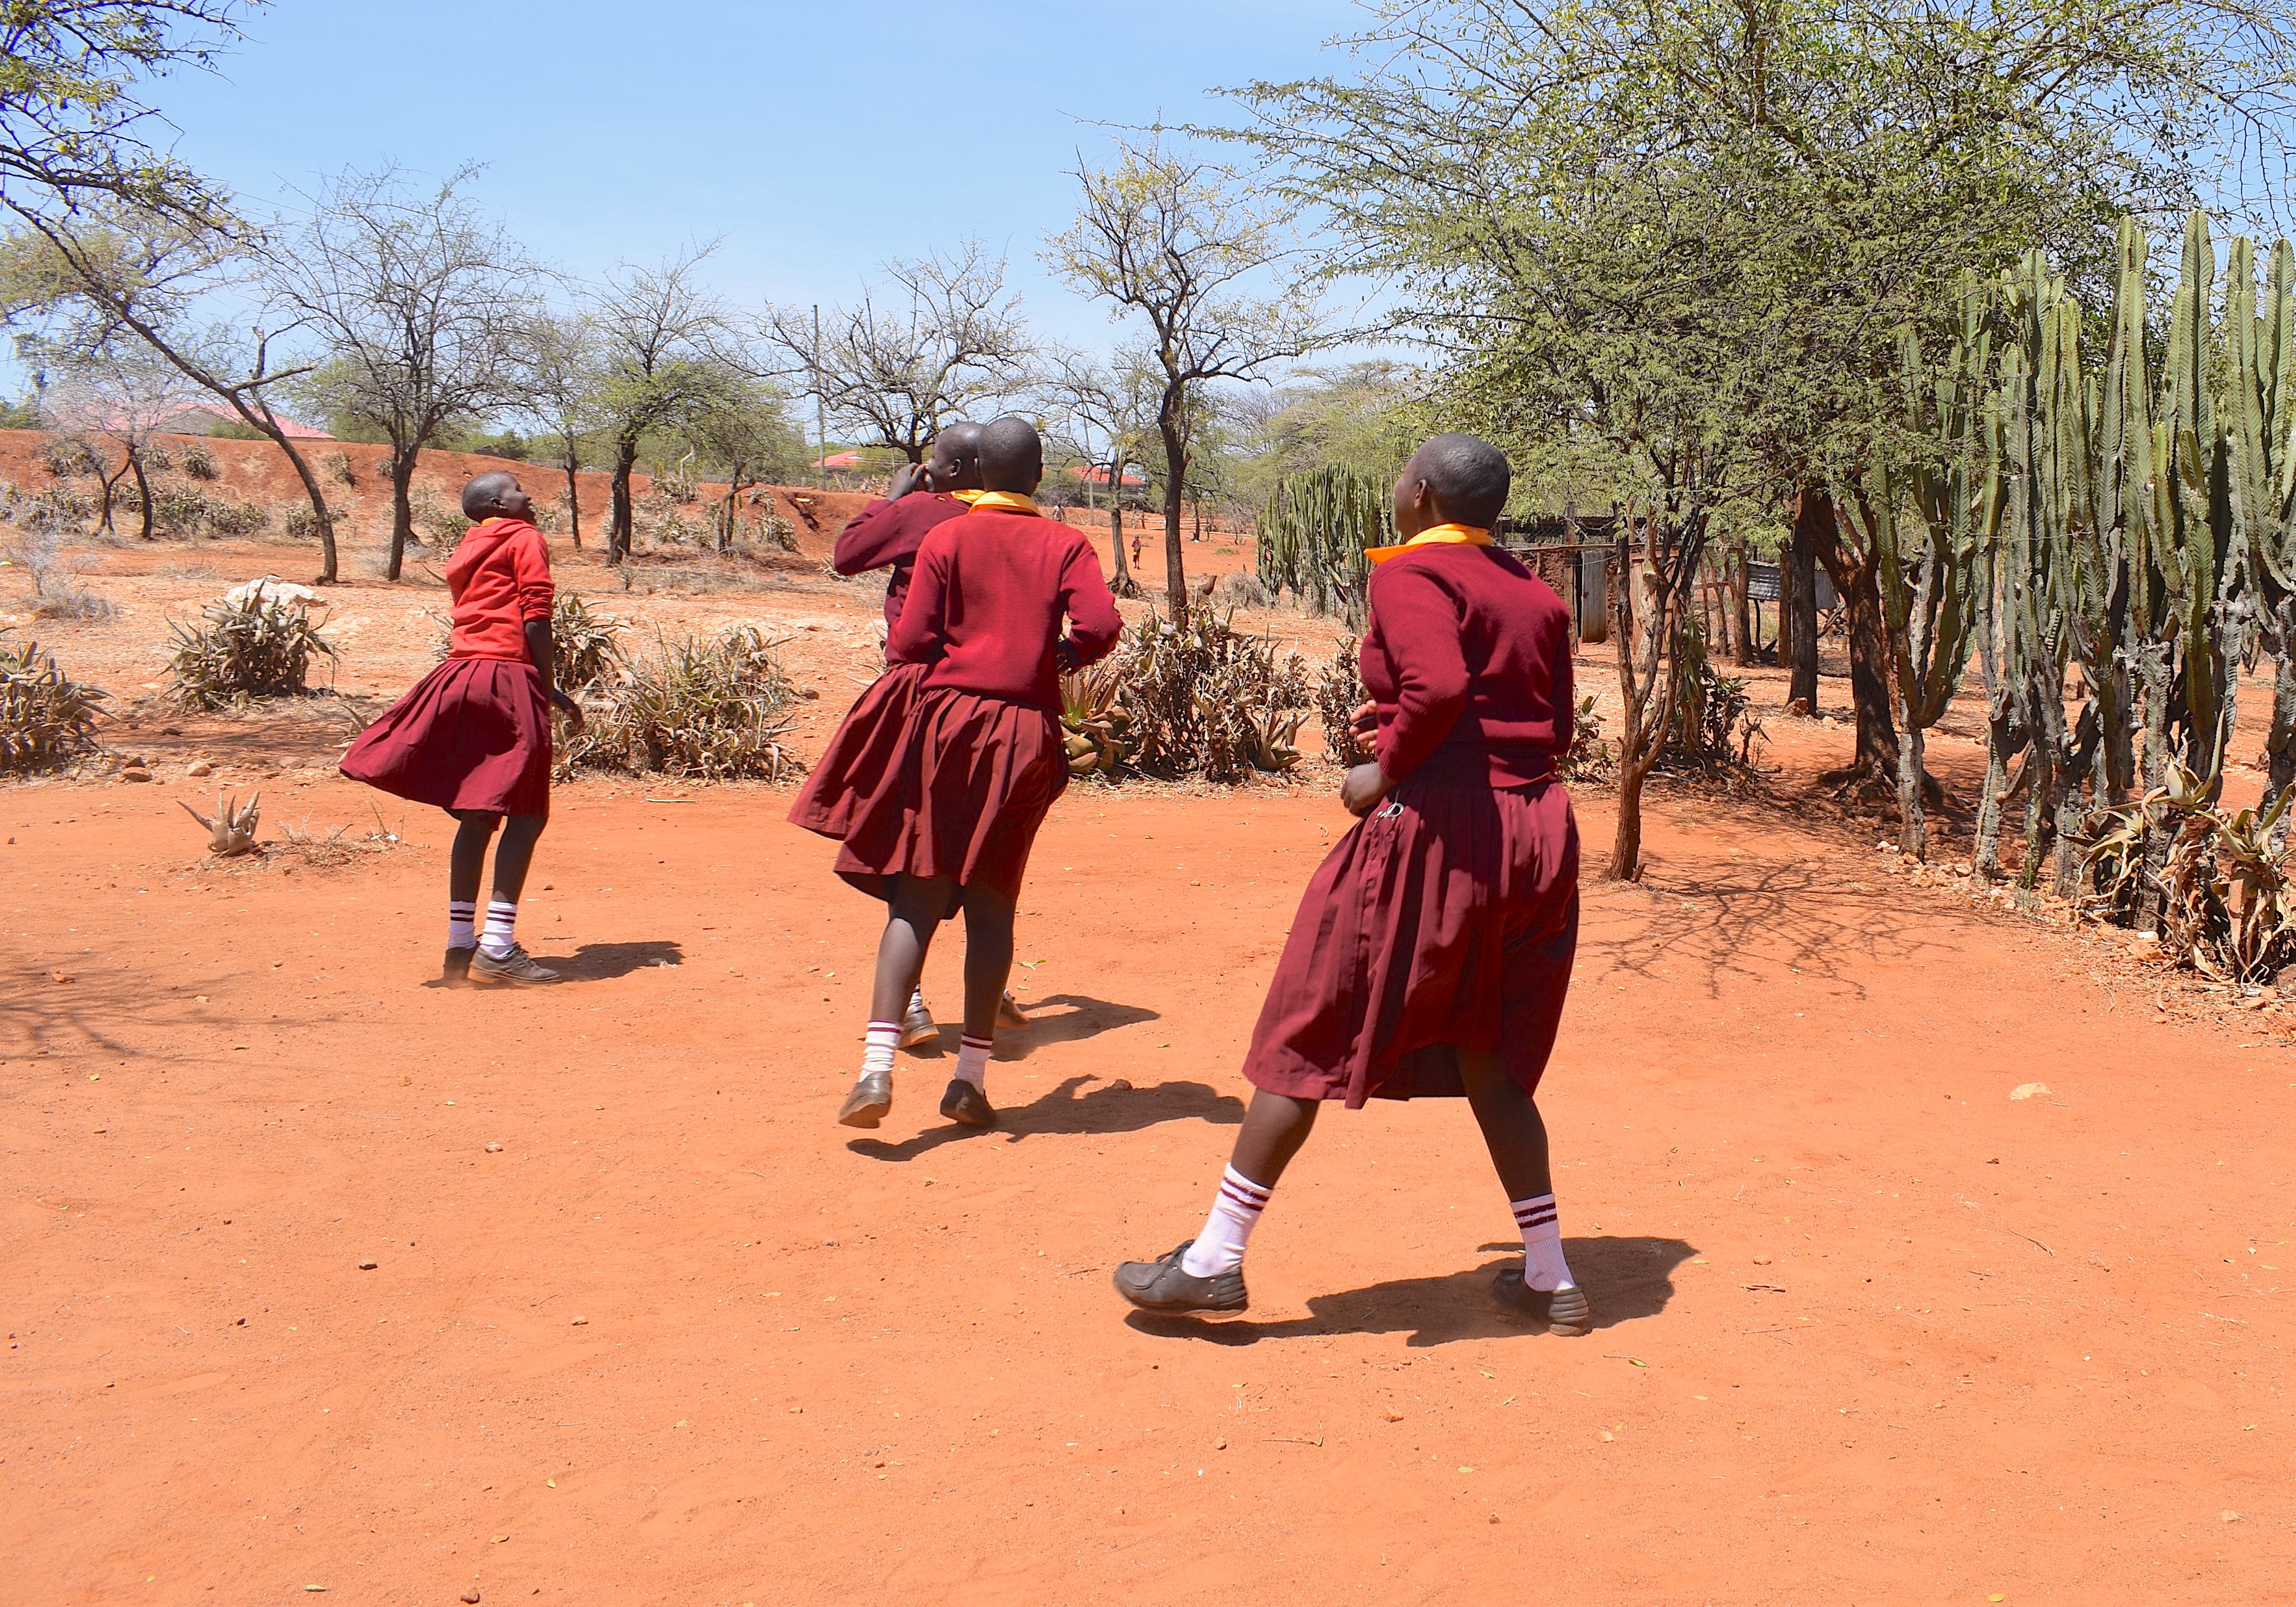 Girls playing in one of the schools where World Vision in partnership with the government has set up safe houses to rescue girls from FGM and child marriage. ©World Vision Photo/Sarah Ooko.